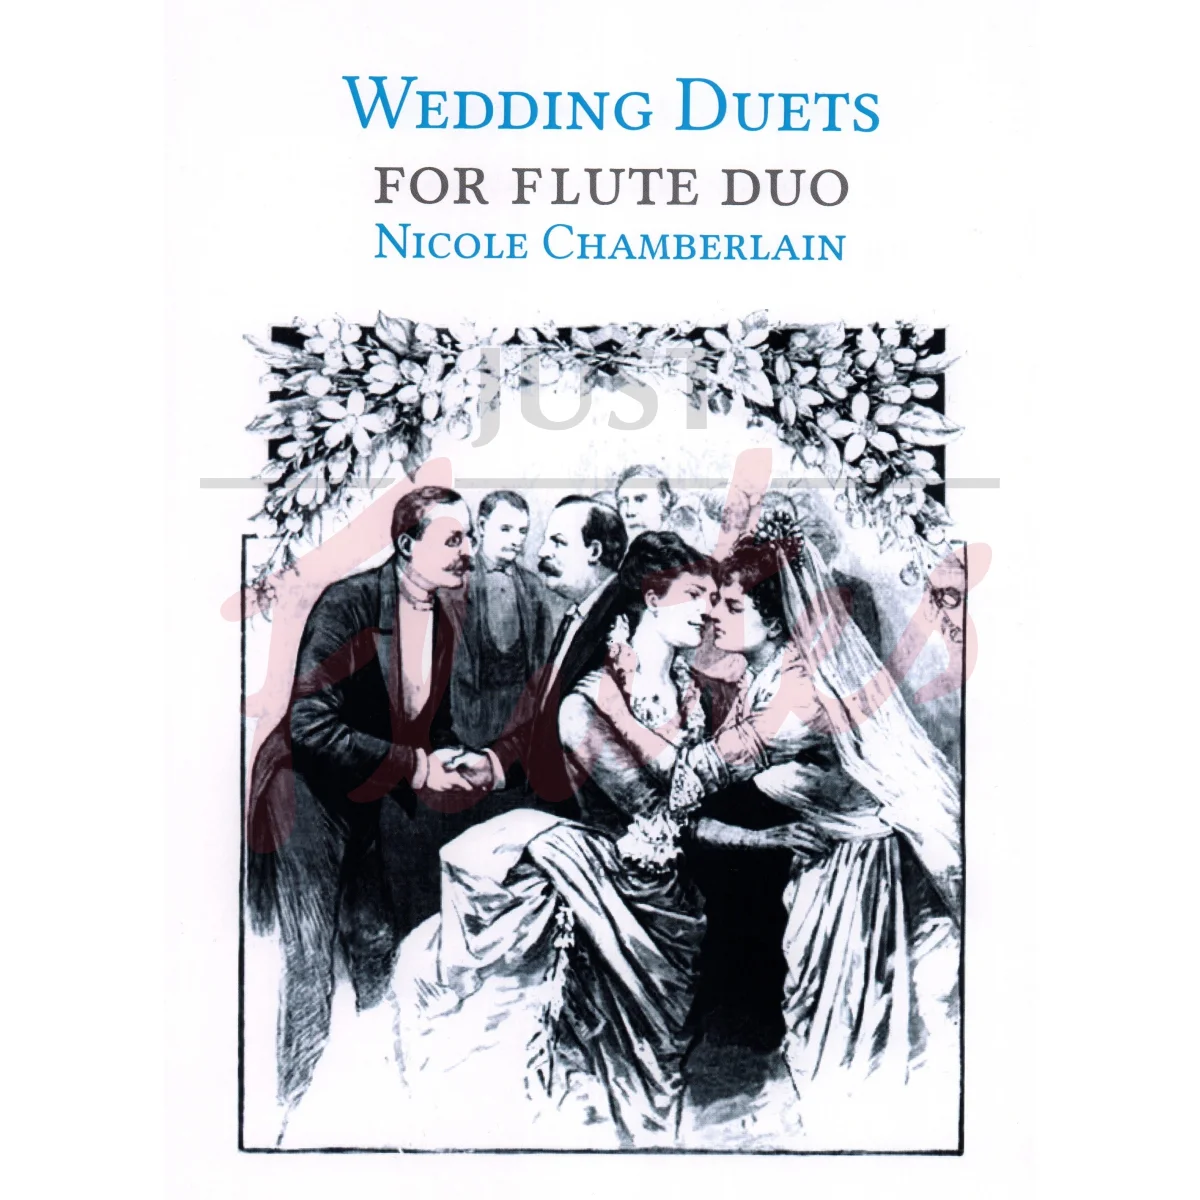 Wedding Duets for Flute Duo